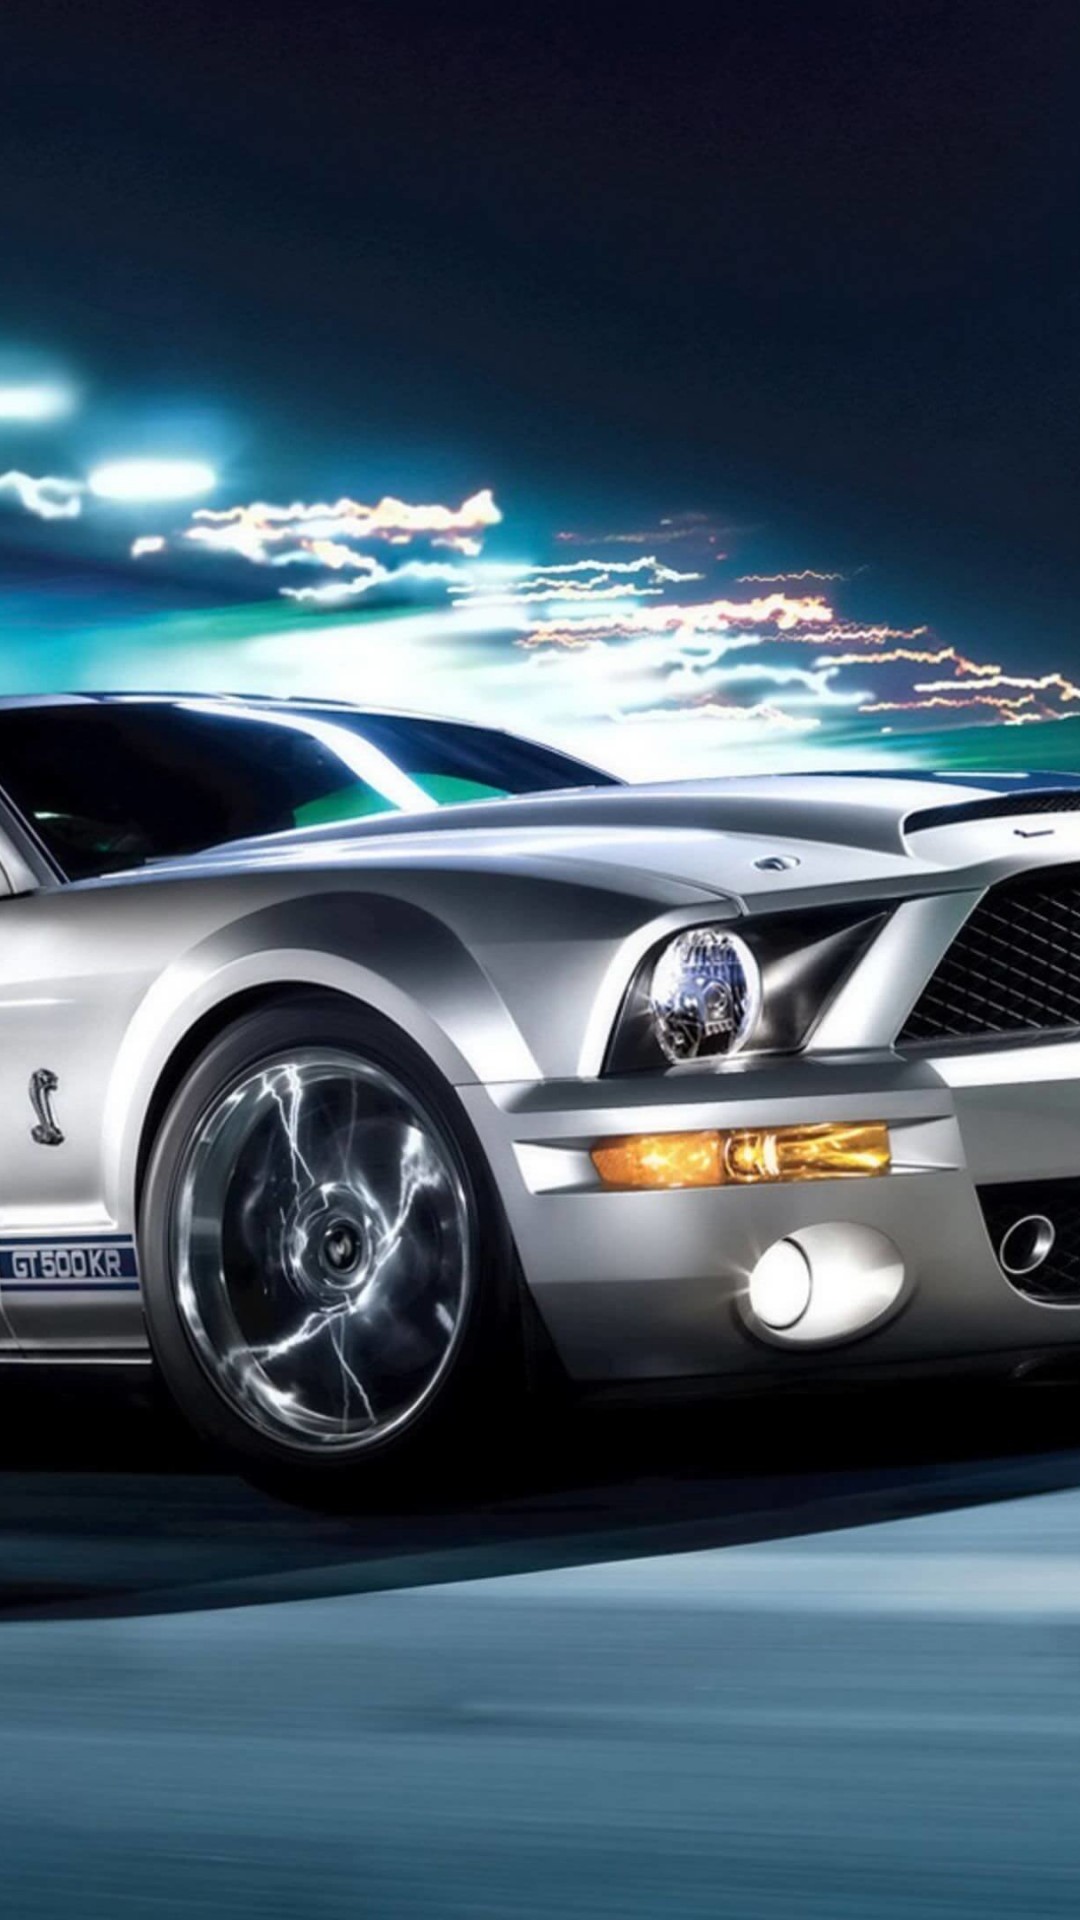 Ford Mustang Shelby GT500KR Wallpaper for SONY Xperia Z2